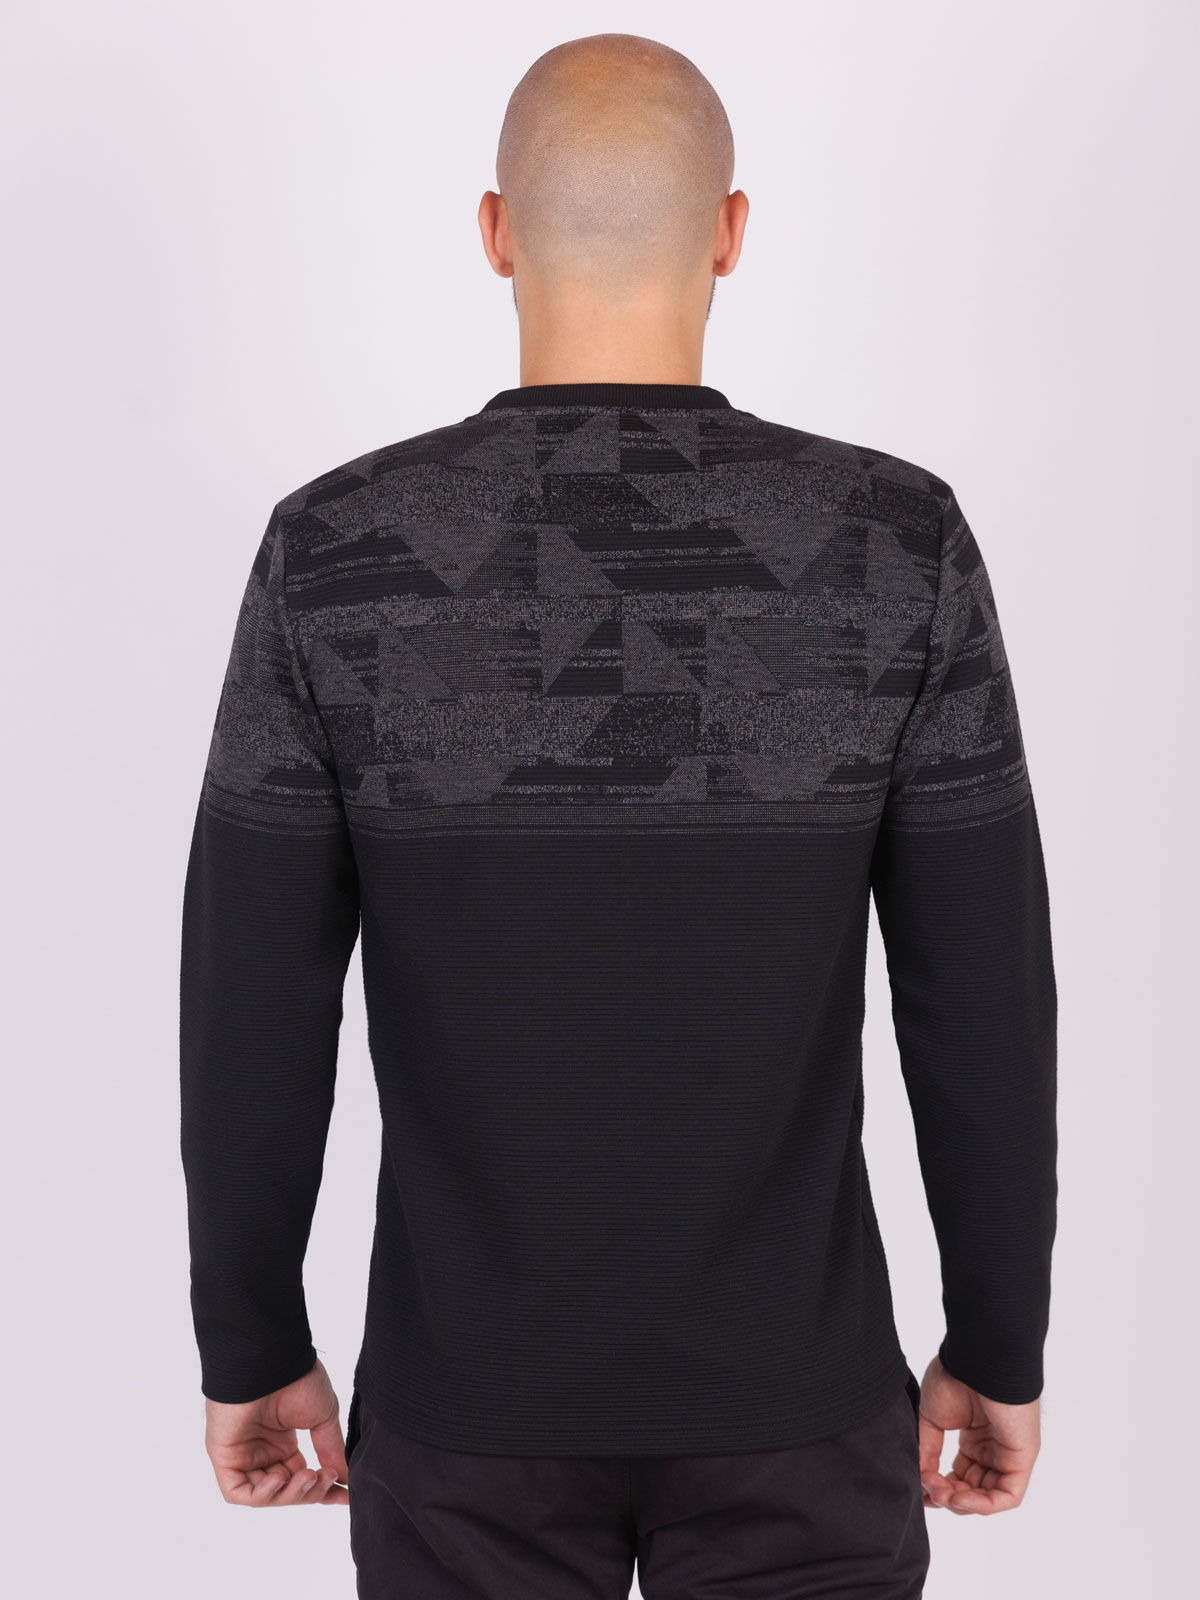 Blouse in black with gray figures - 42347 € 32.06 img2